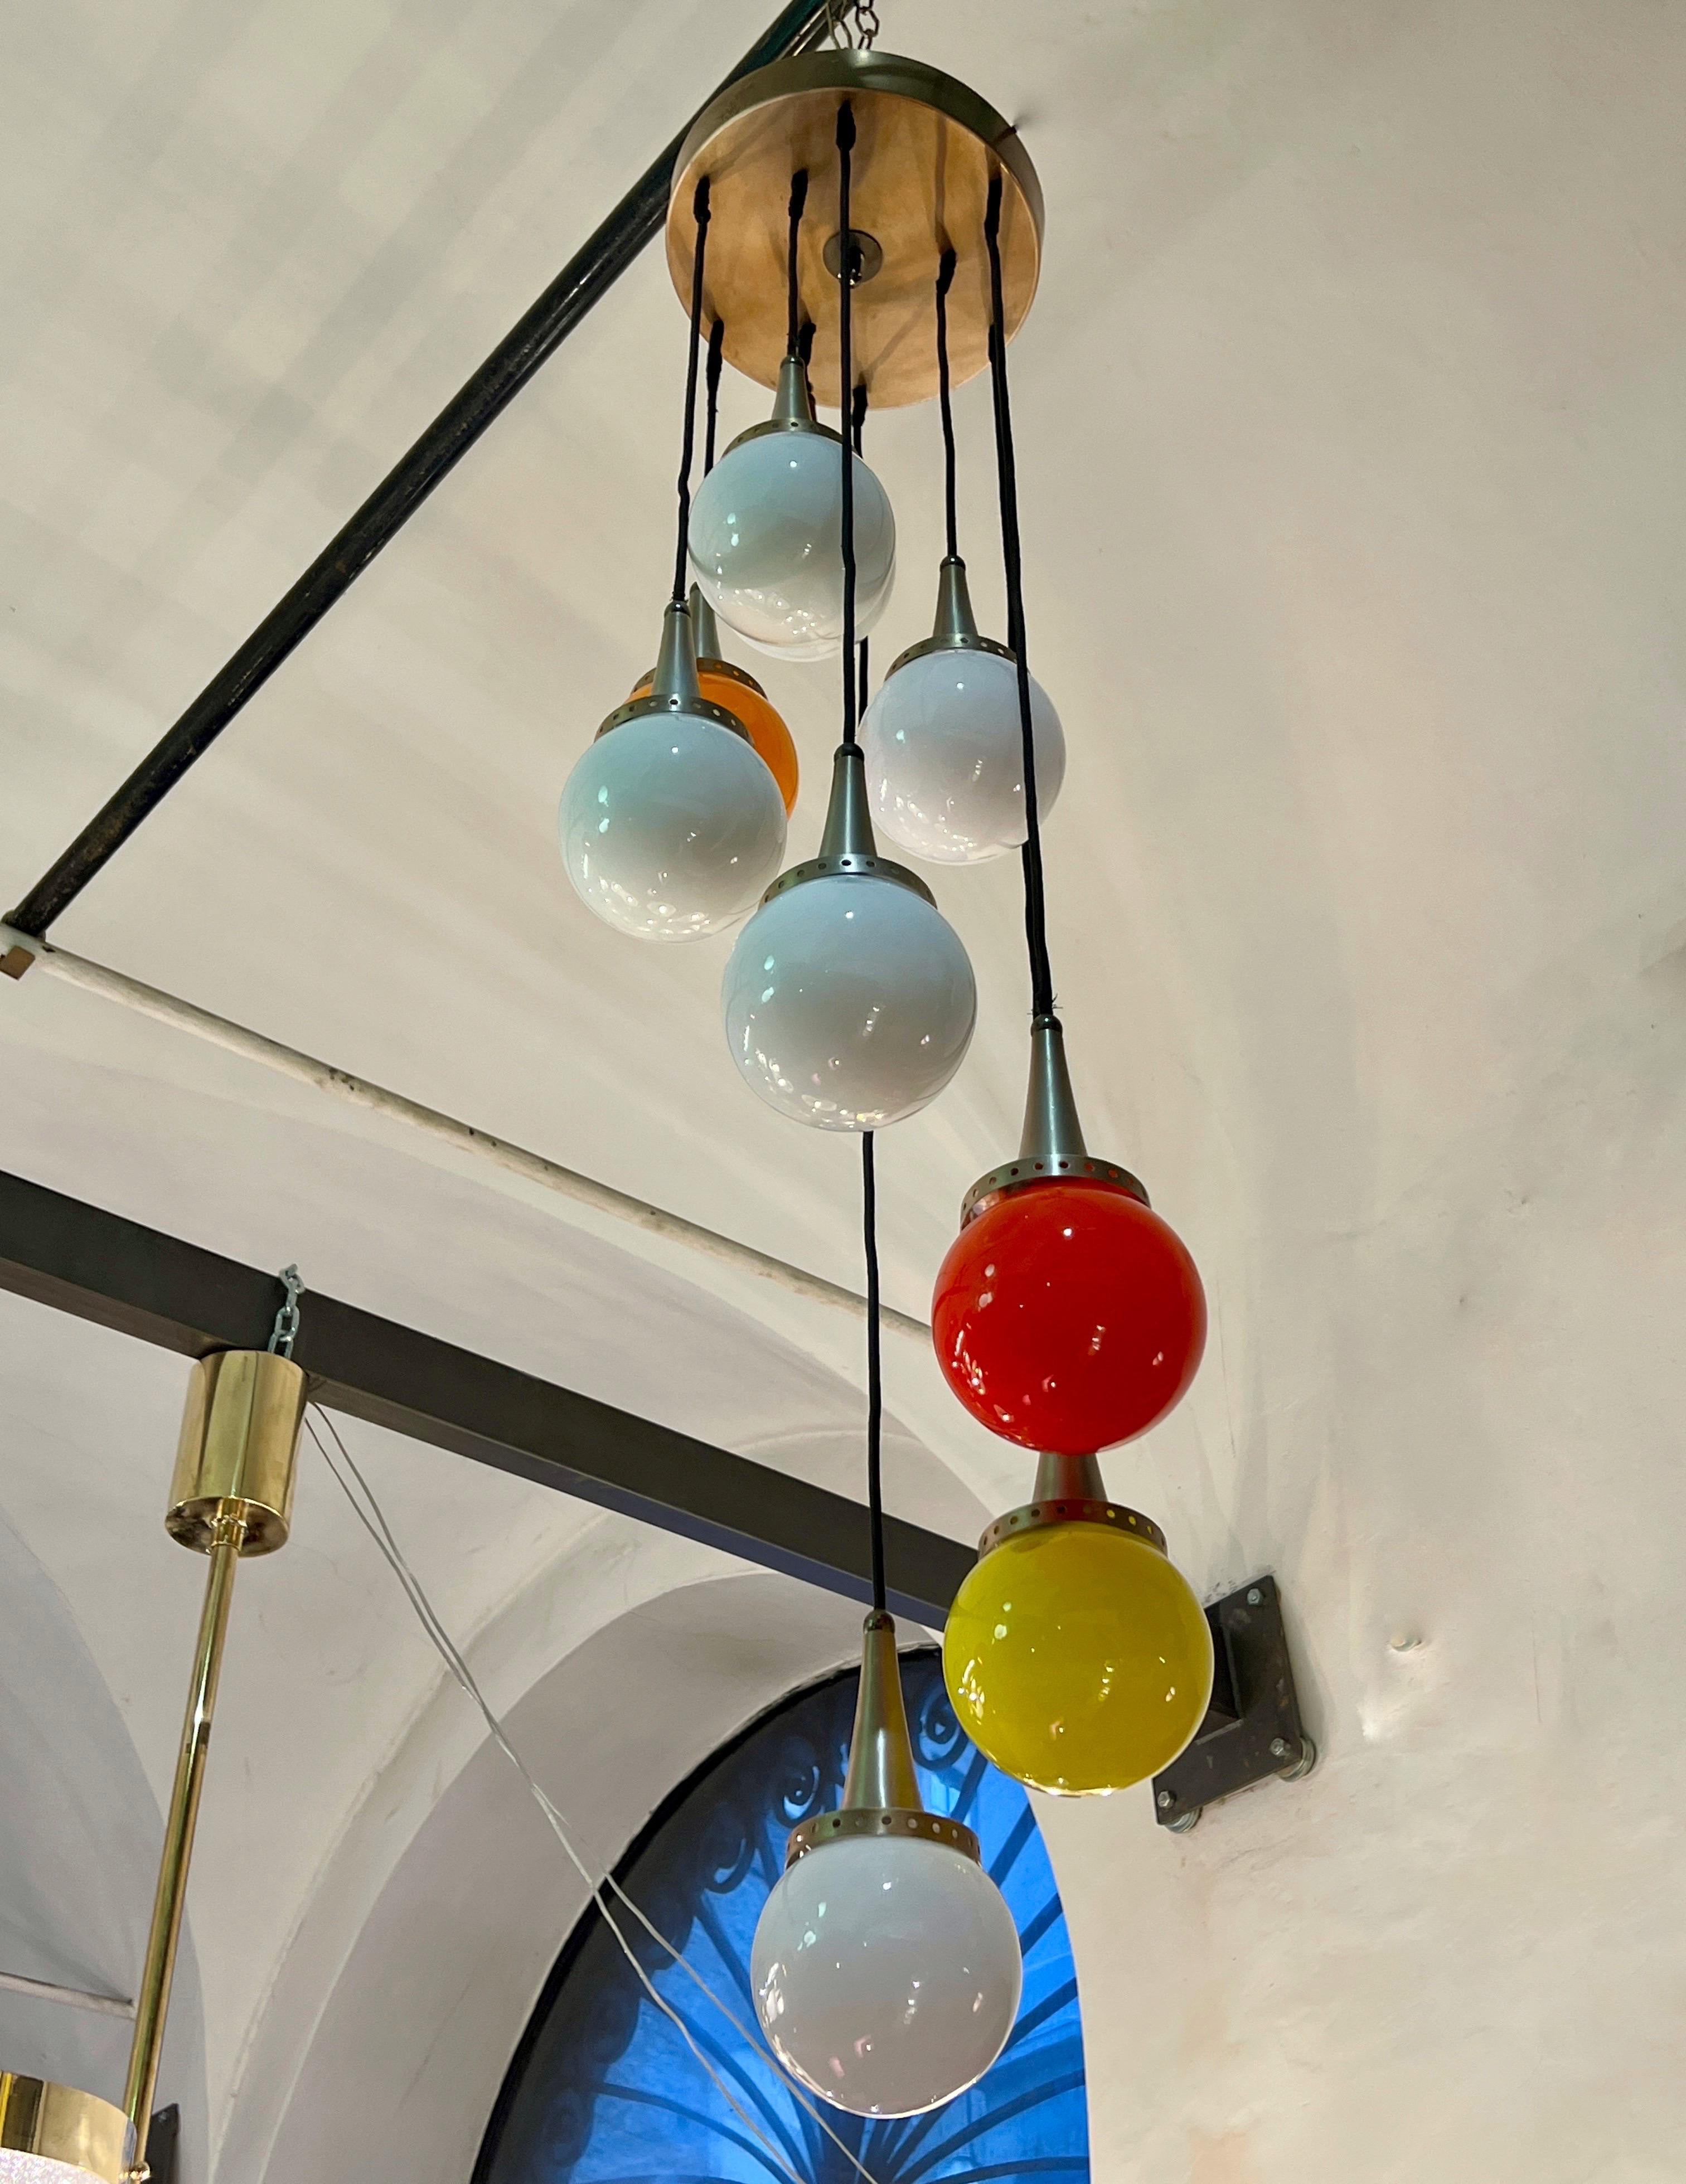 Vintage Pendant Cascade Murano Chandelier 9 lights attributed to Vistosi, brass ceiling cup.
The colored Murano Glass spheres are 6 white, one orange, one red and one yellow.